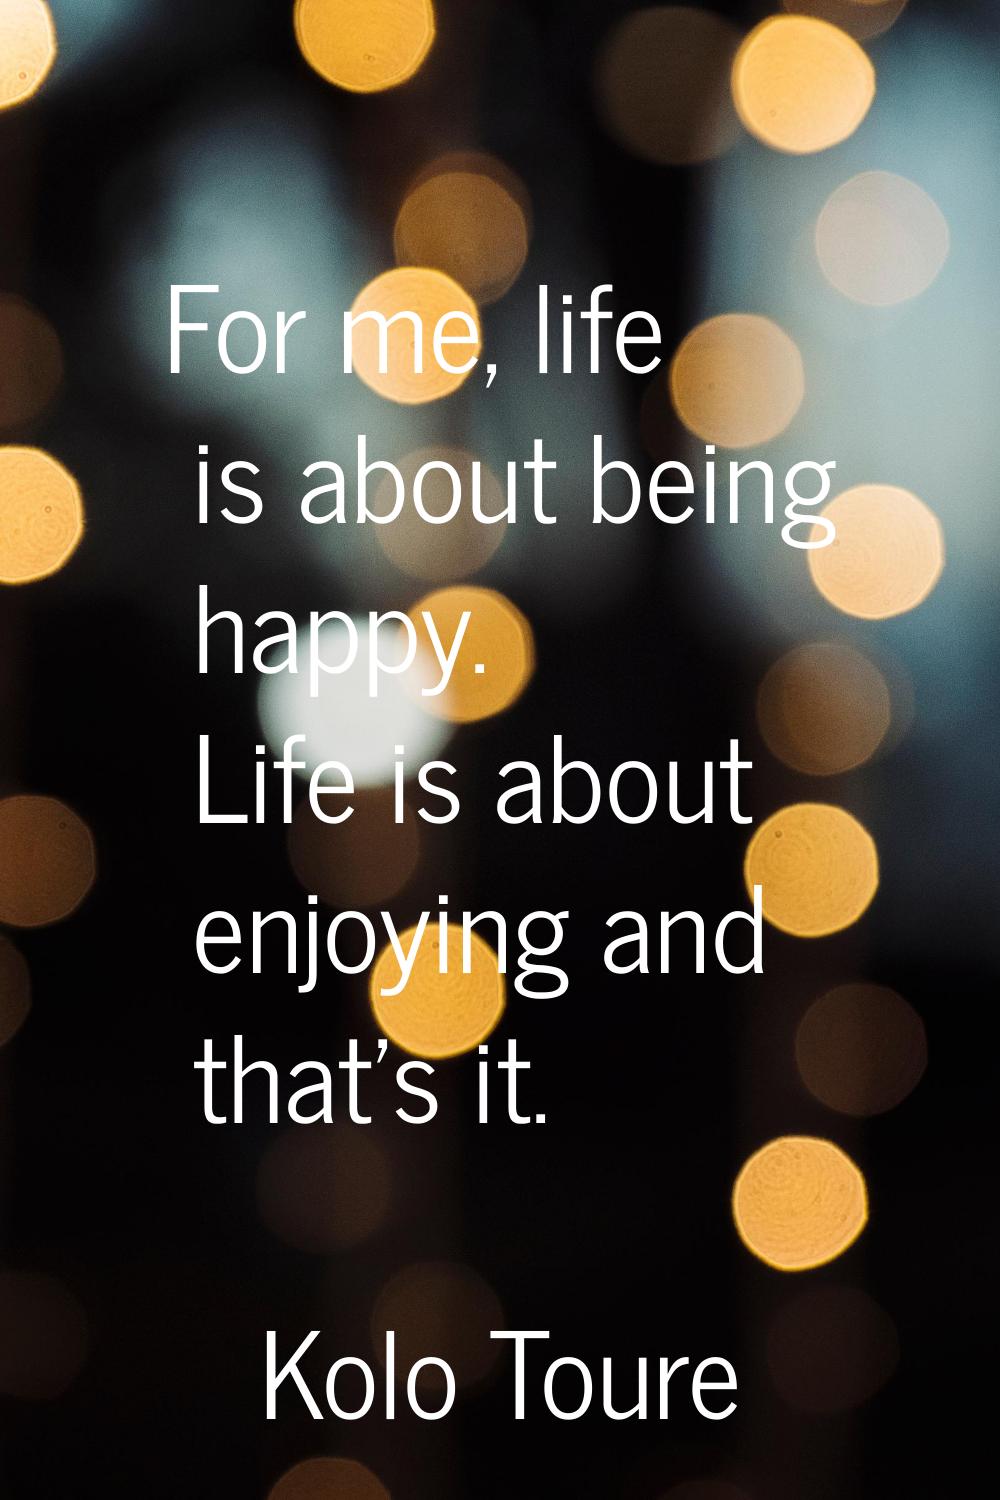 For me, life is about being happy. Life is about enjoying and that's it.